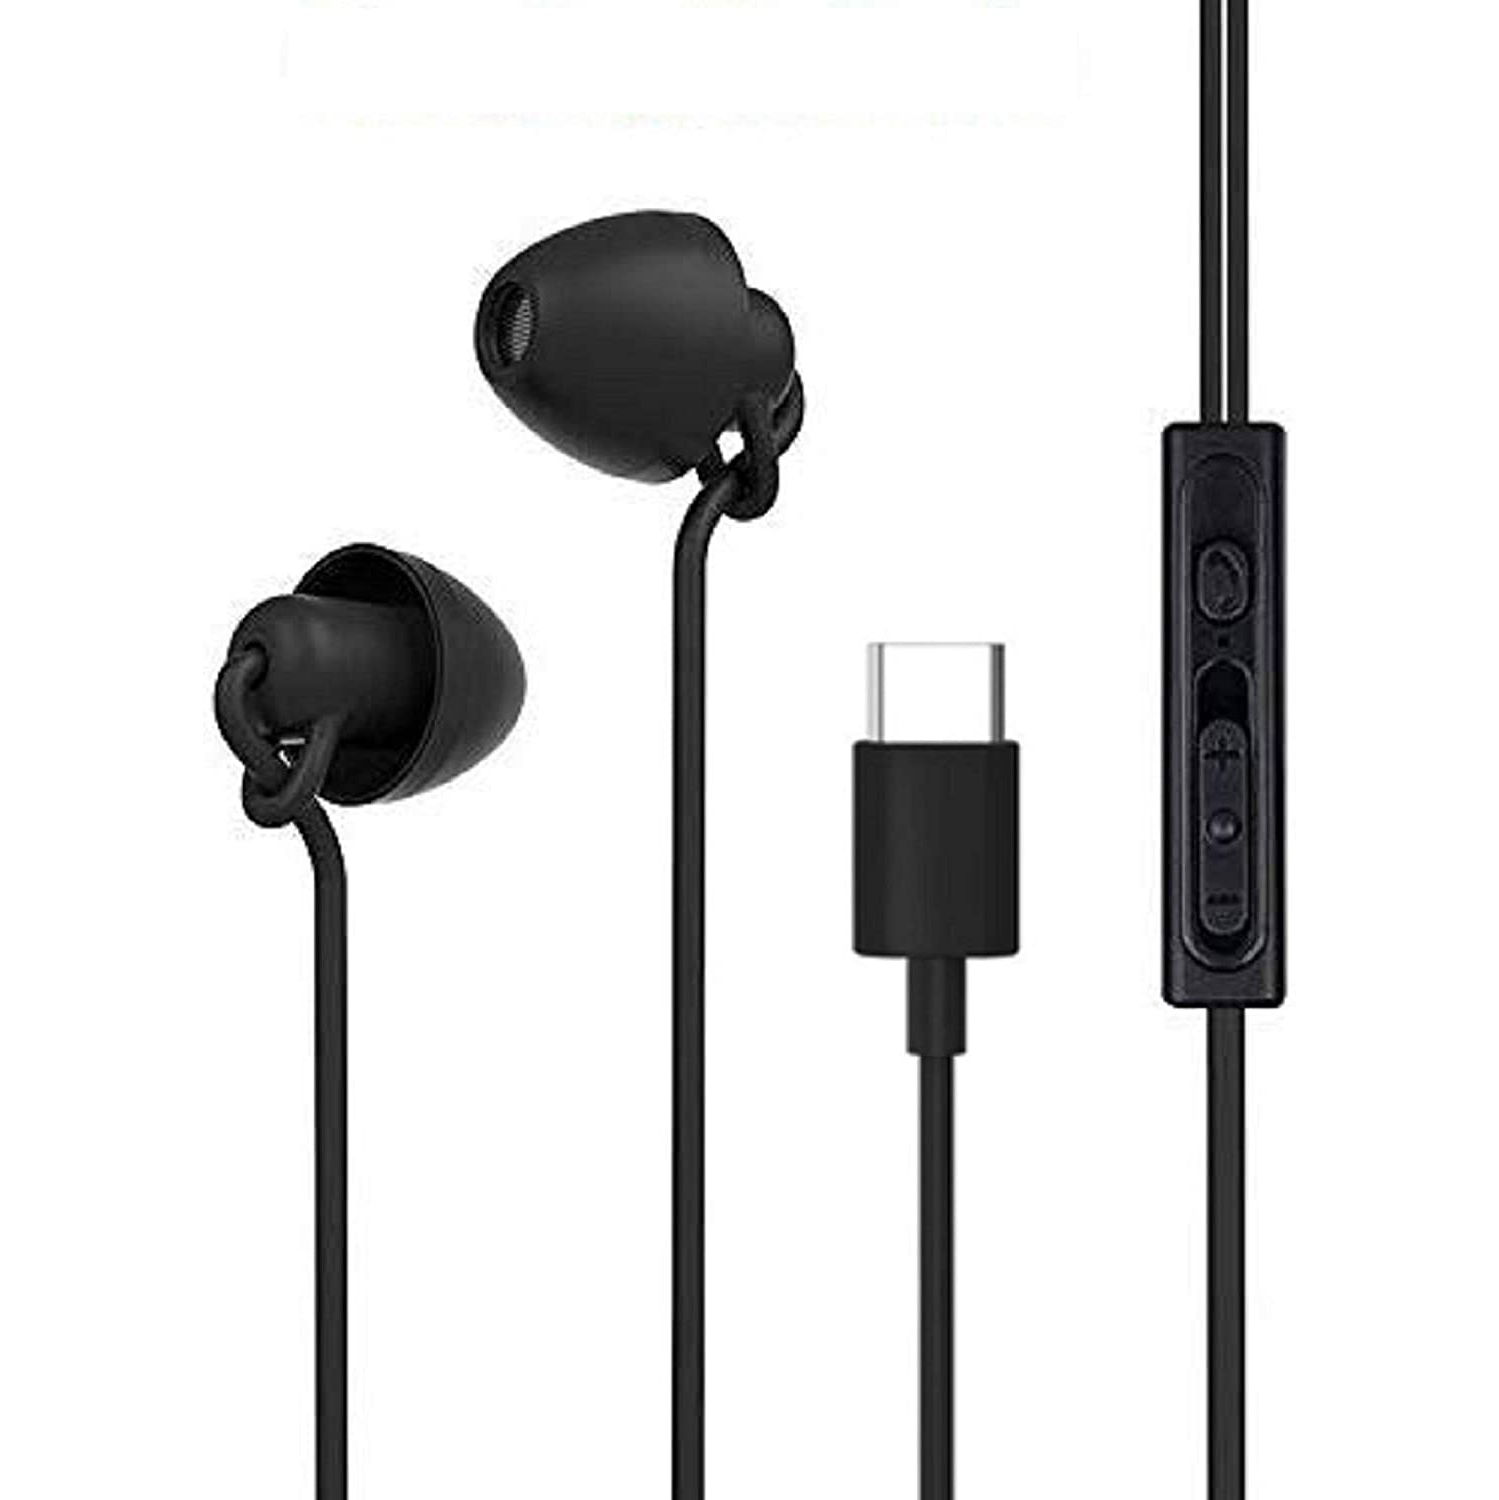 USB C Earphones,Silicon Sleeping Earbuds Noise Cancelling Wired Type C Headphones Compatible with Pixel 3/2/XL,iPad Pro